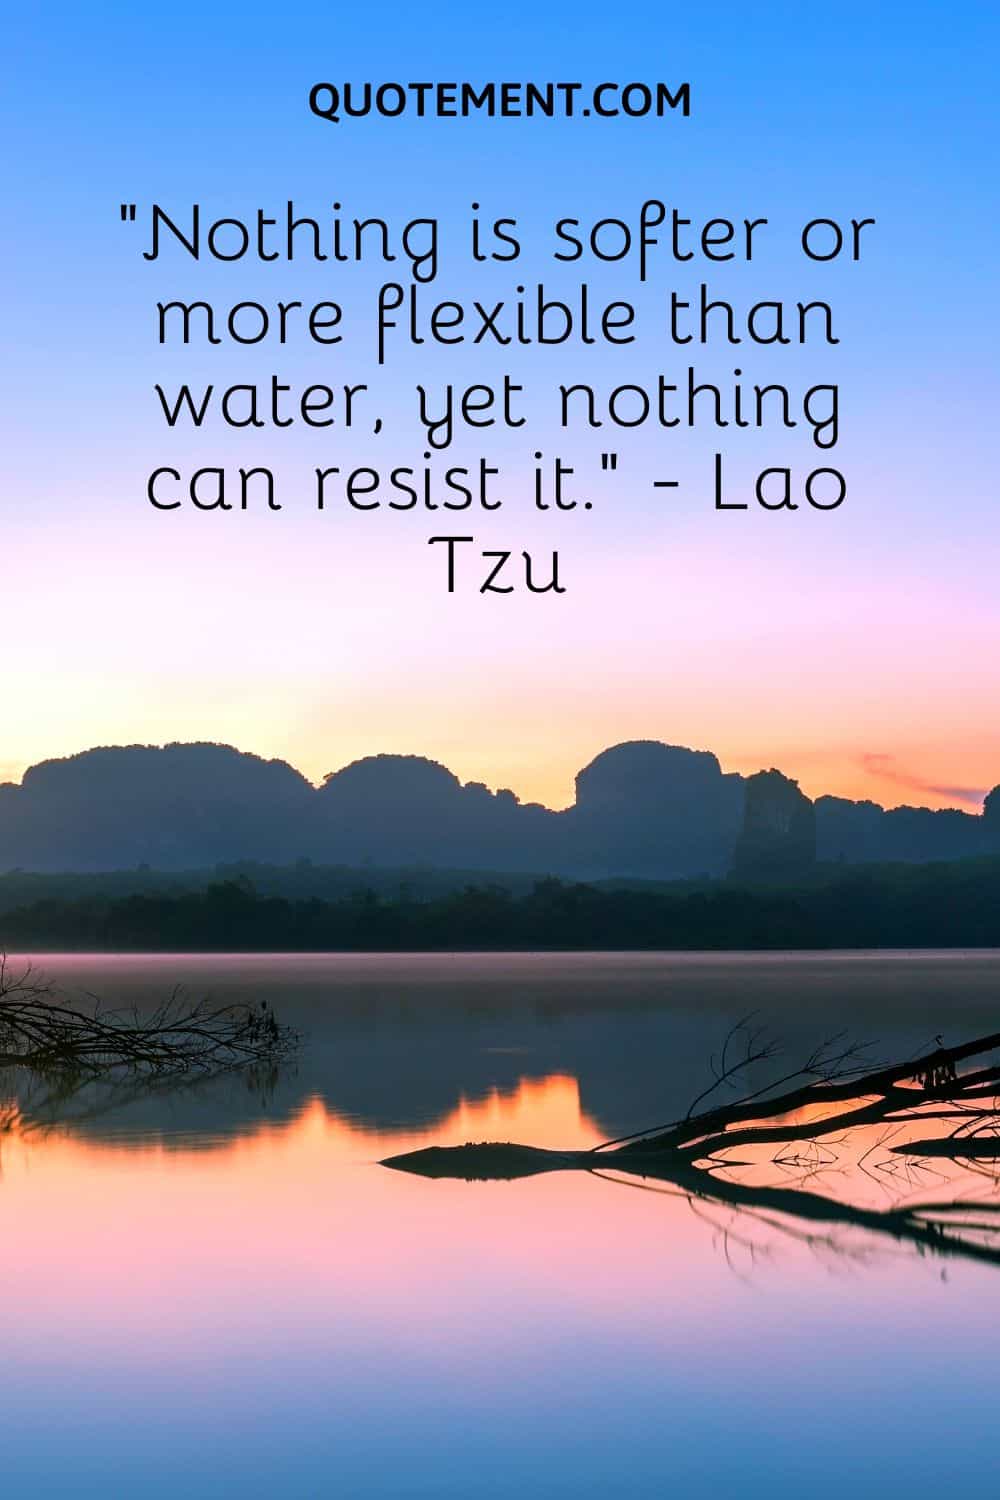 “Nothing is softer or more flexible than water, yet nothing can resist it.” - Lao Tzu